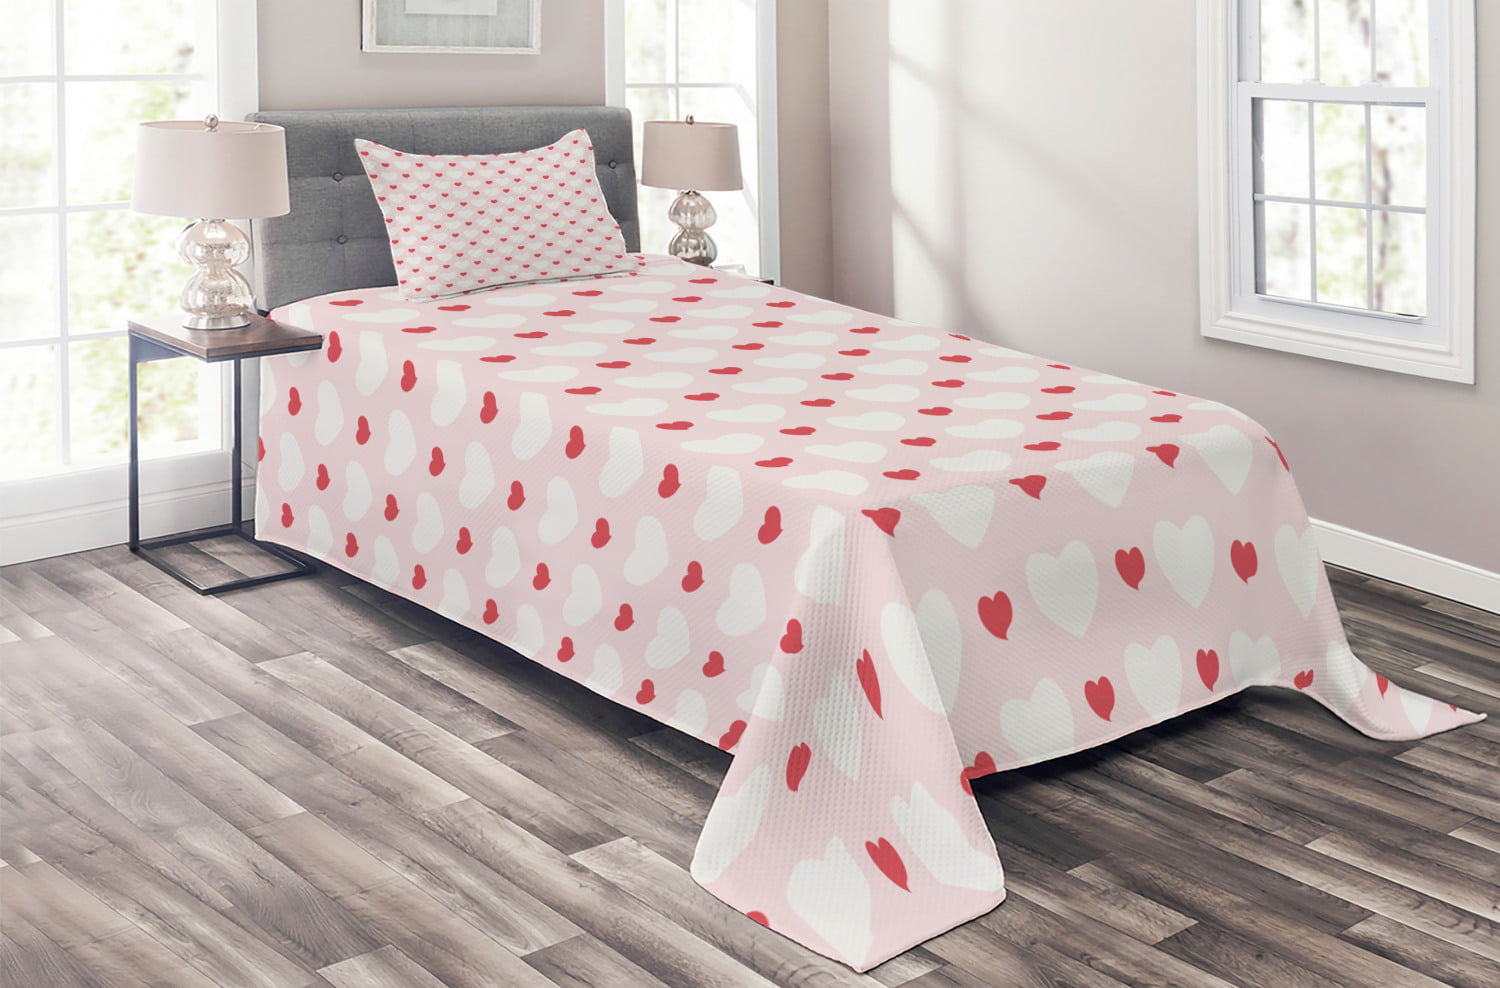 Angel Holding a Red Heart Print Details about   Anime Quilted Bedspread & Pillow Shams Set 